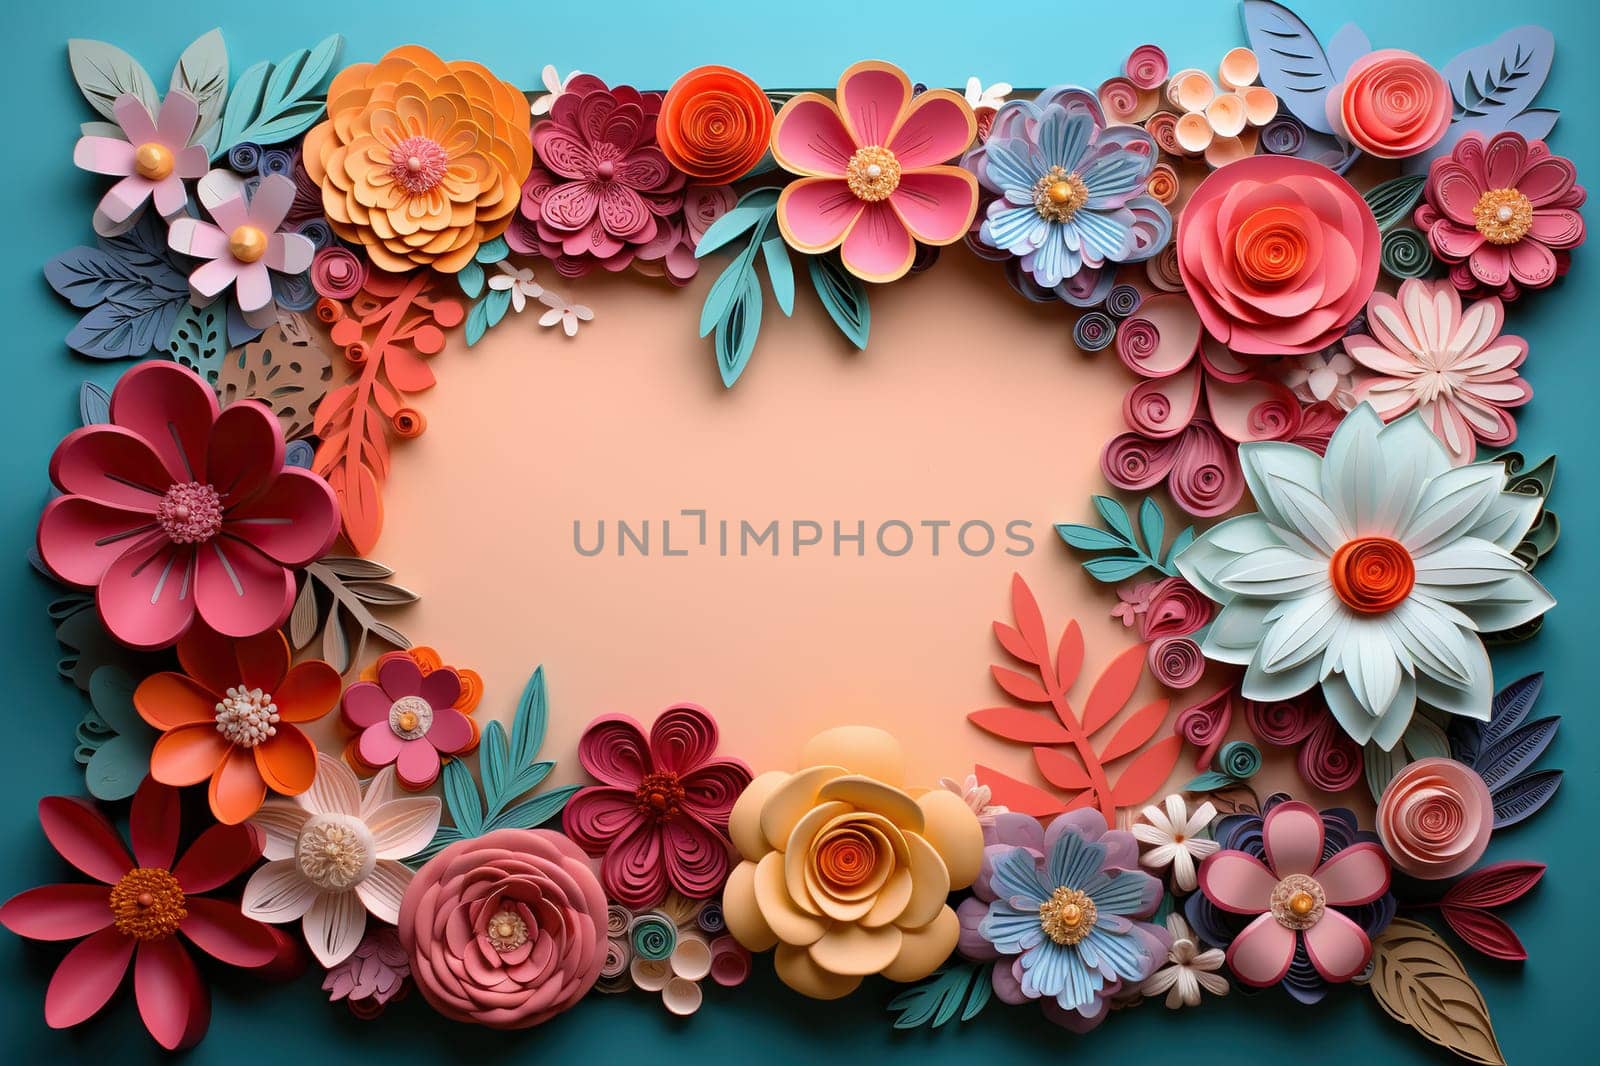 Spring, summer blue background with cut paper style flowers and place for text.